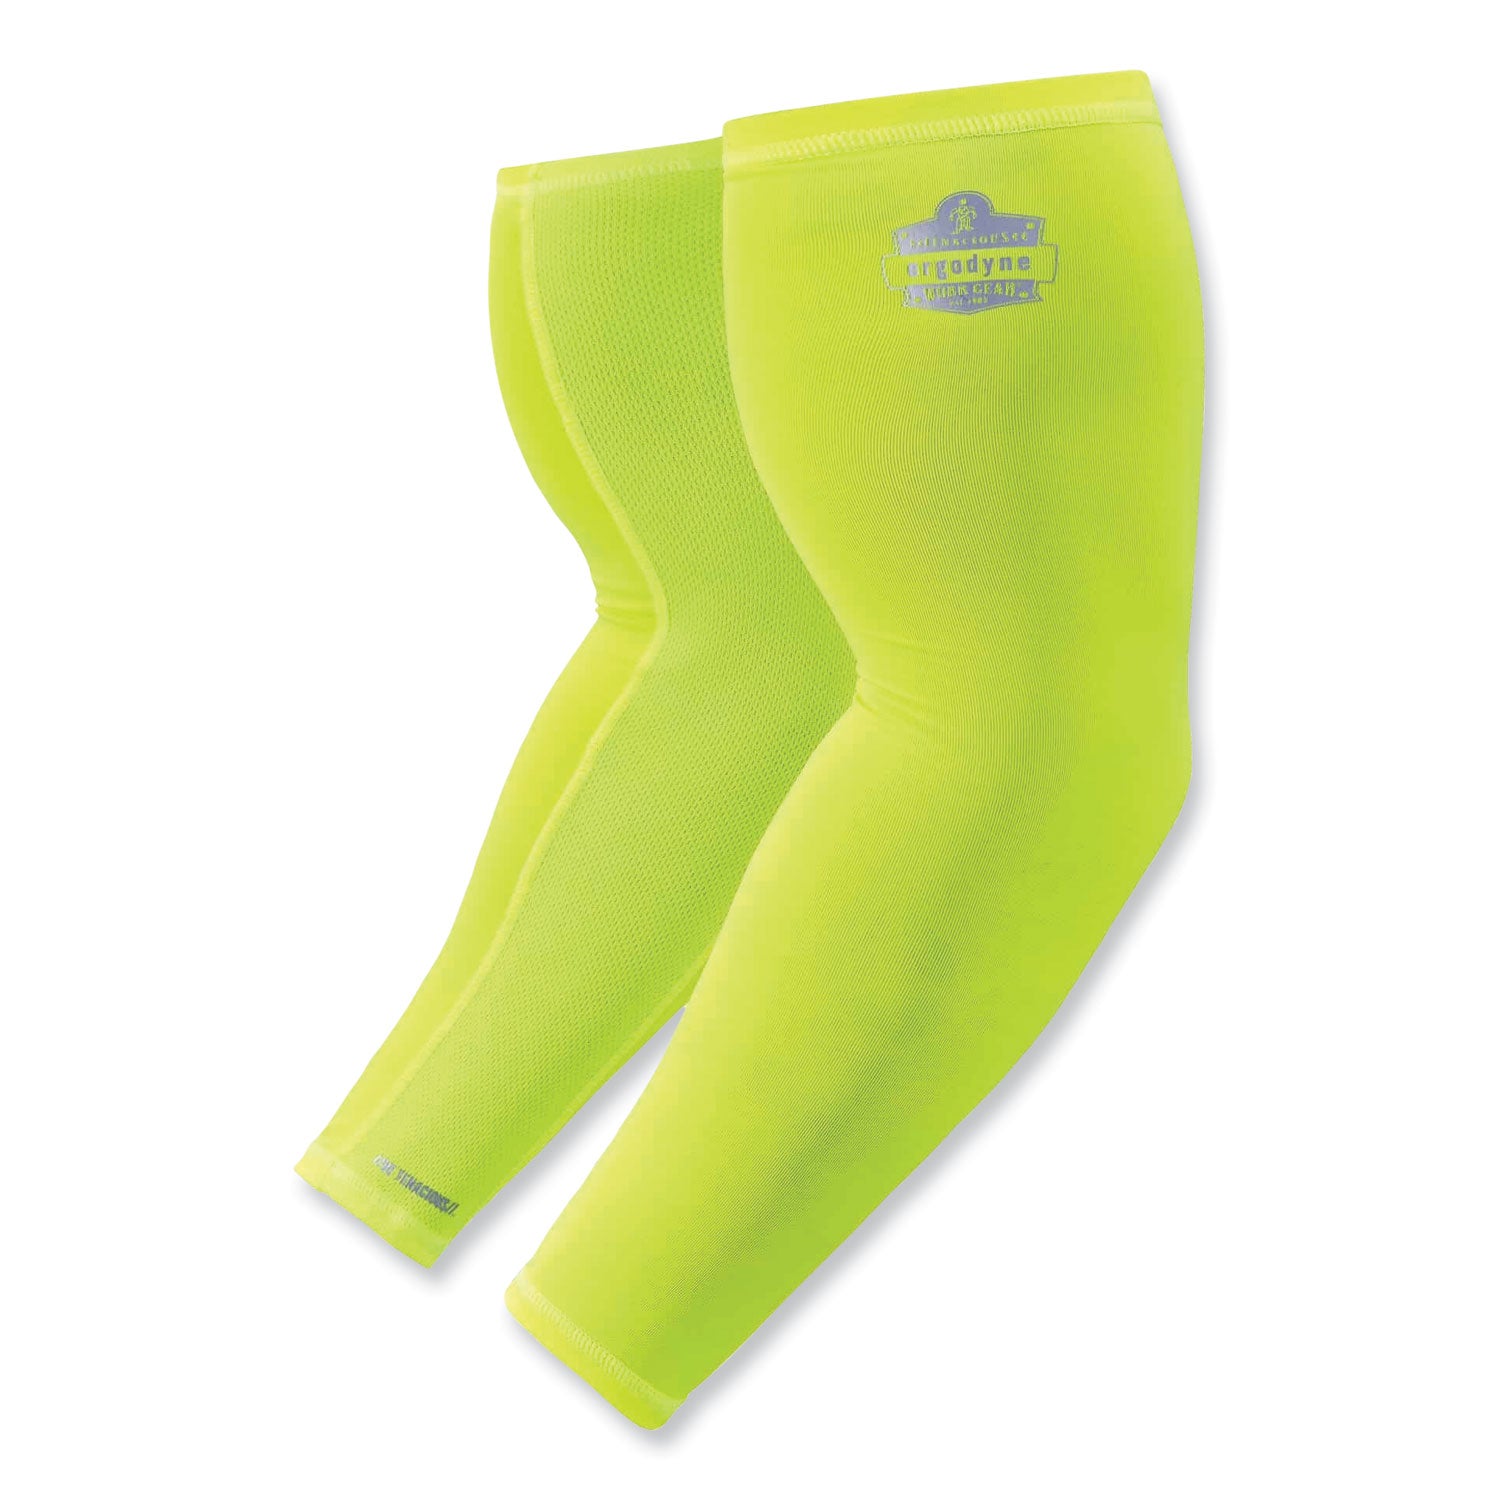 chill-its-6690-performance-knit-cooling-arm-sleeve-polyester-spandex-2x-large-lime-2-sleeves-ships-in-1-3-business-days_ego12286 - 1